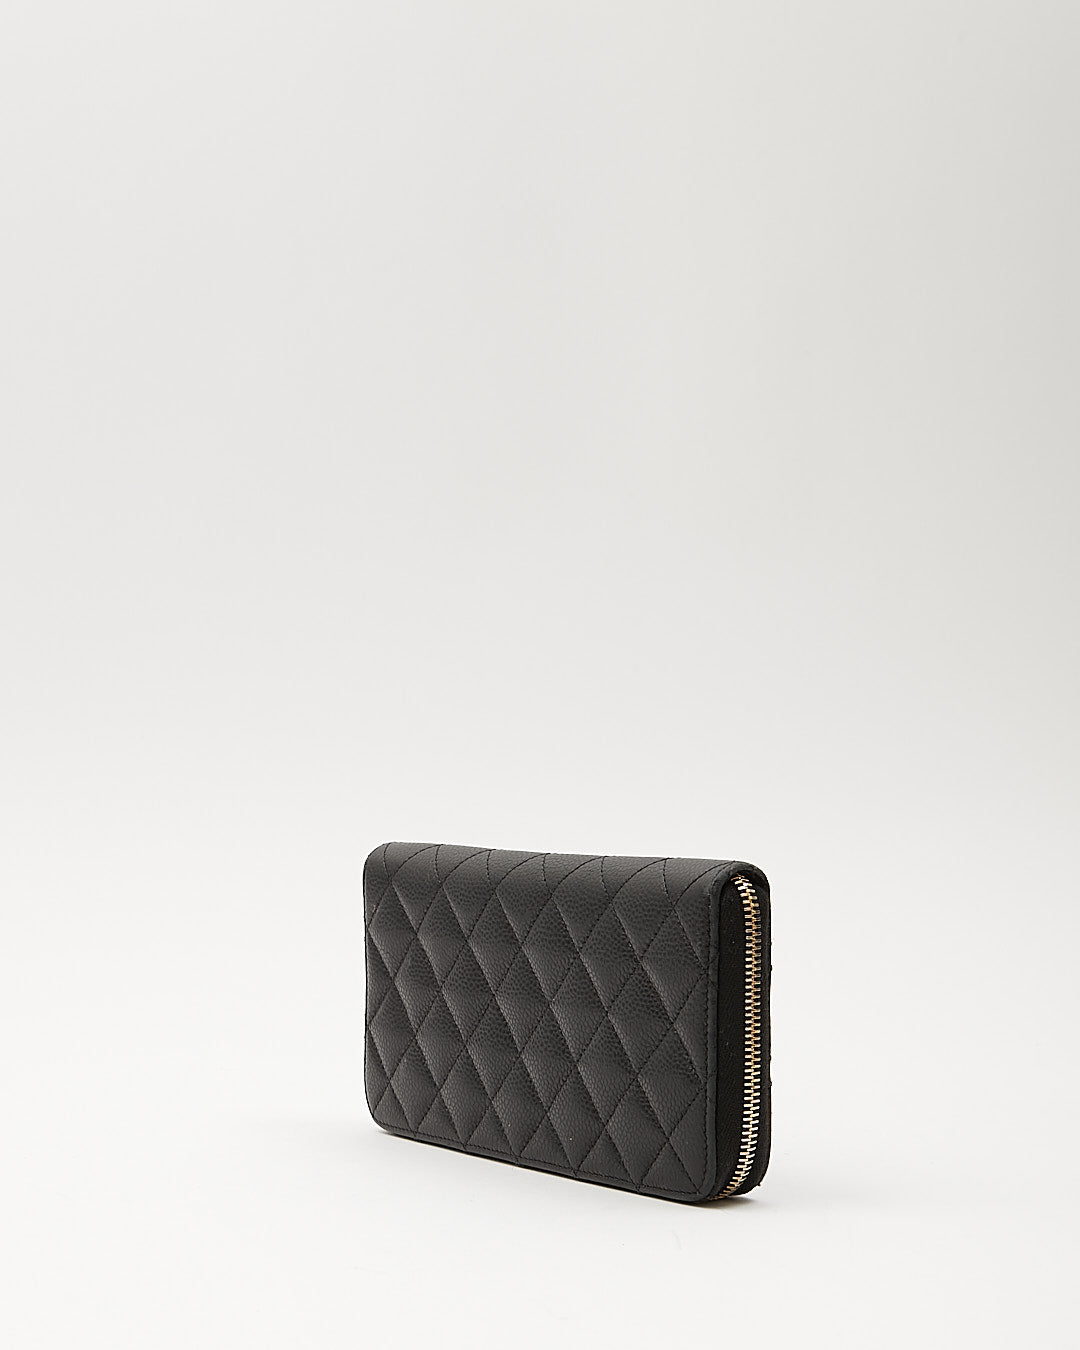 Chanel Black Caviar Leather Quilted Large Gusset Continental Wallet